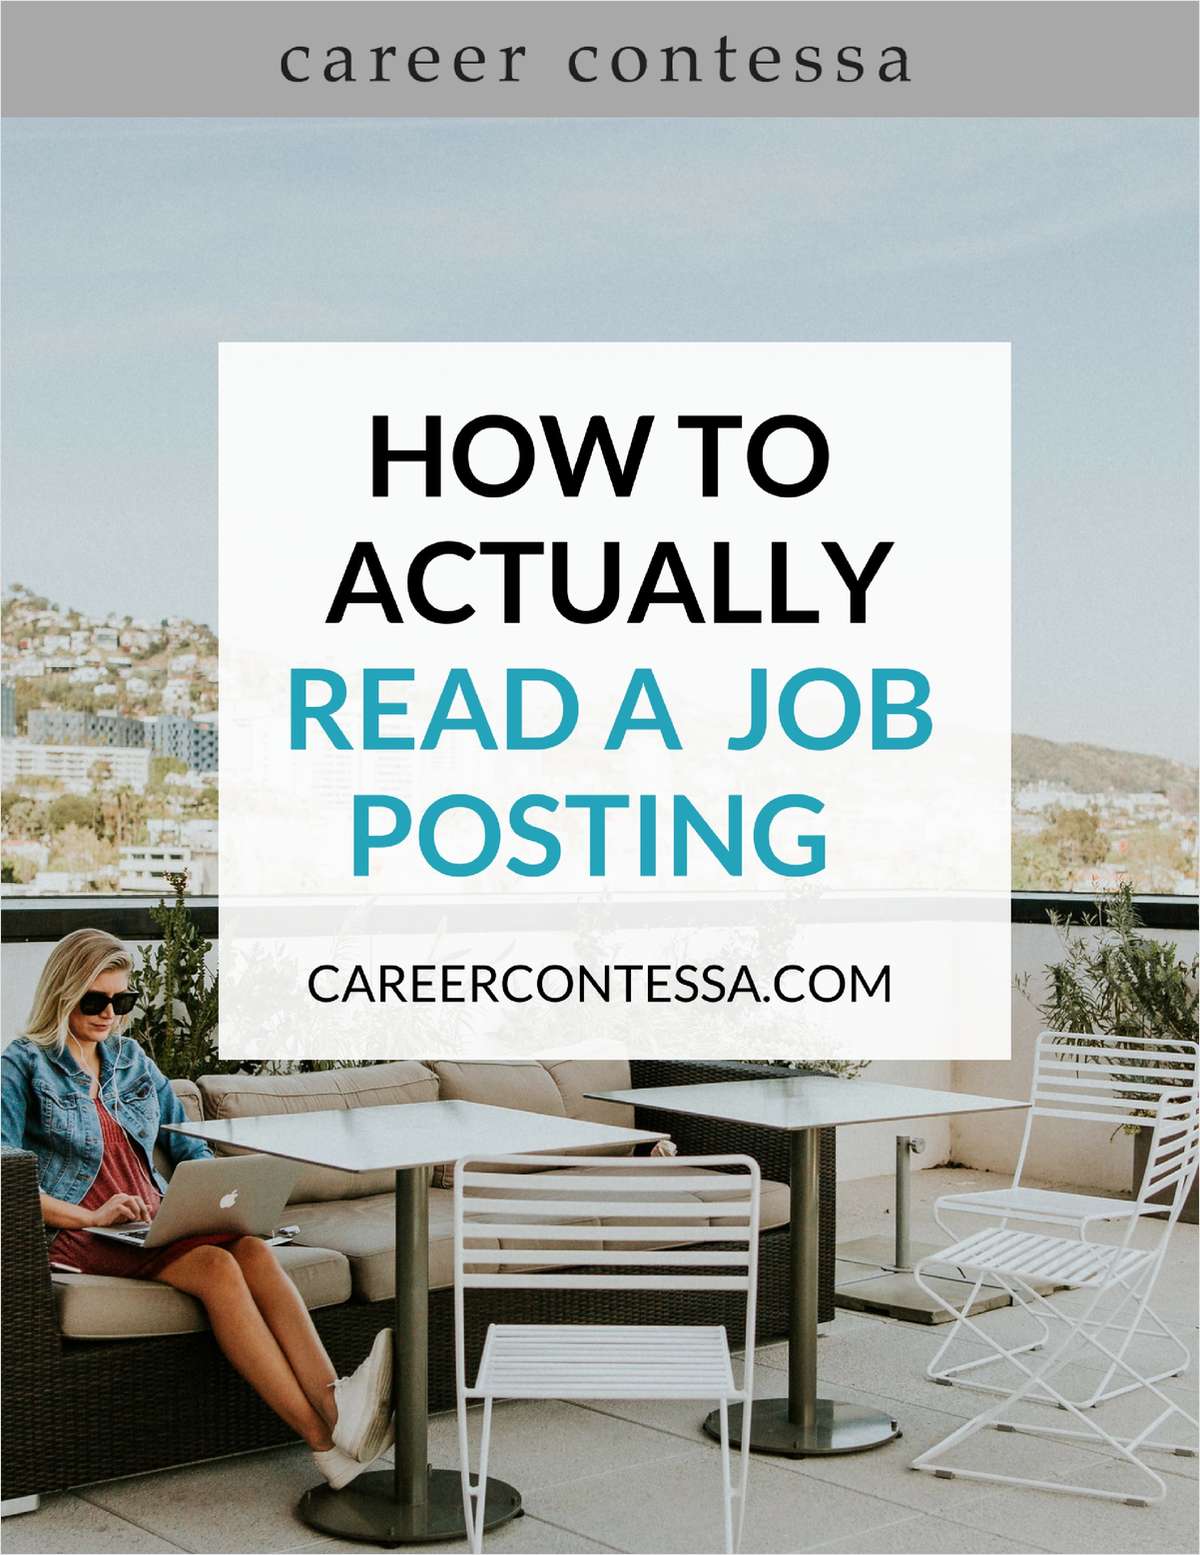 How to Actually Read a Job Posting